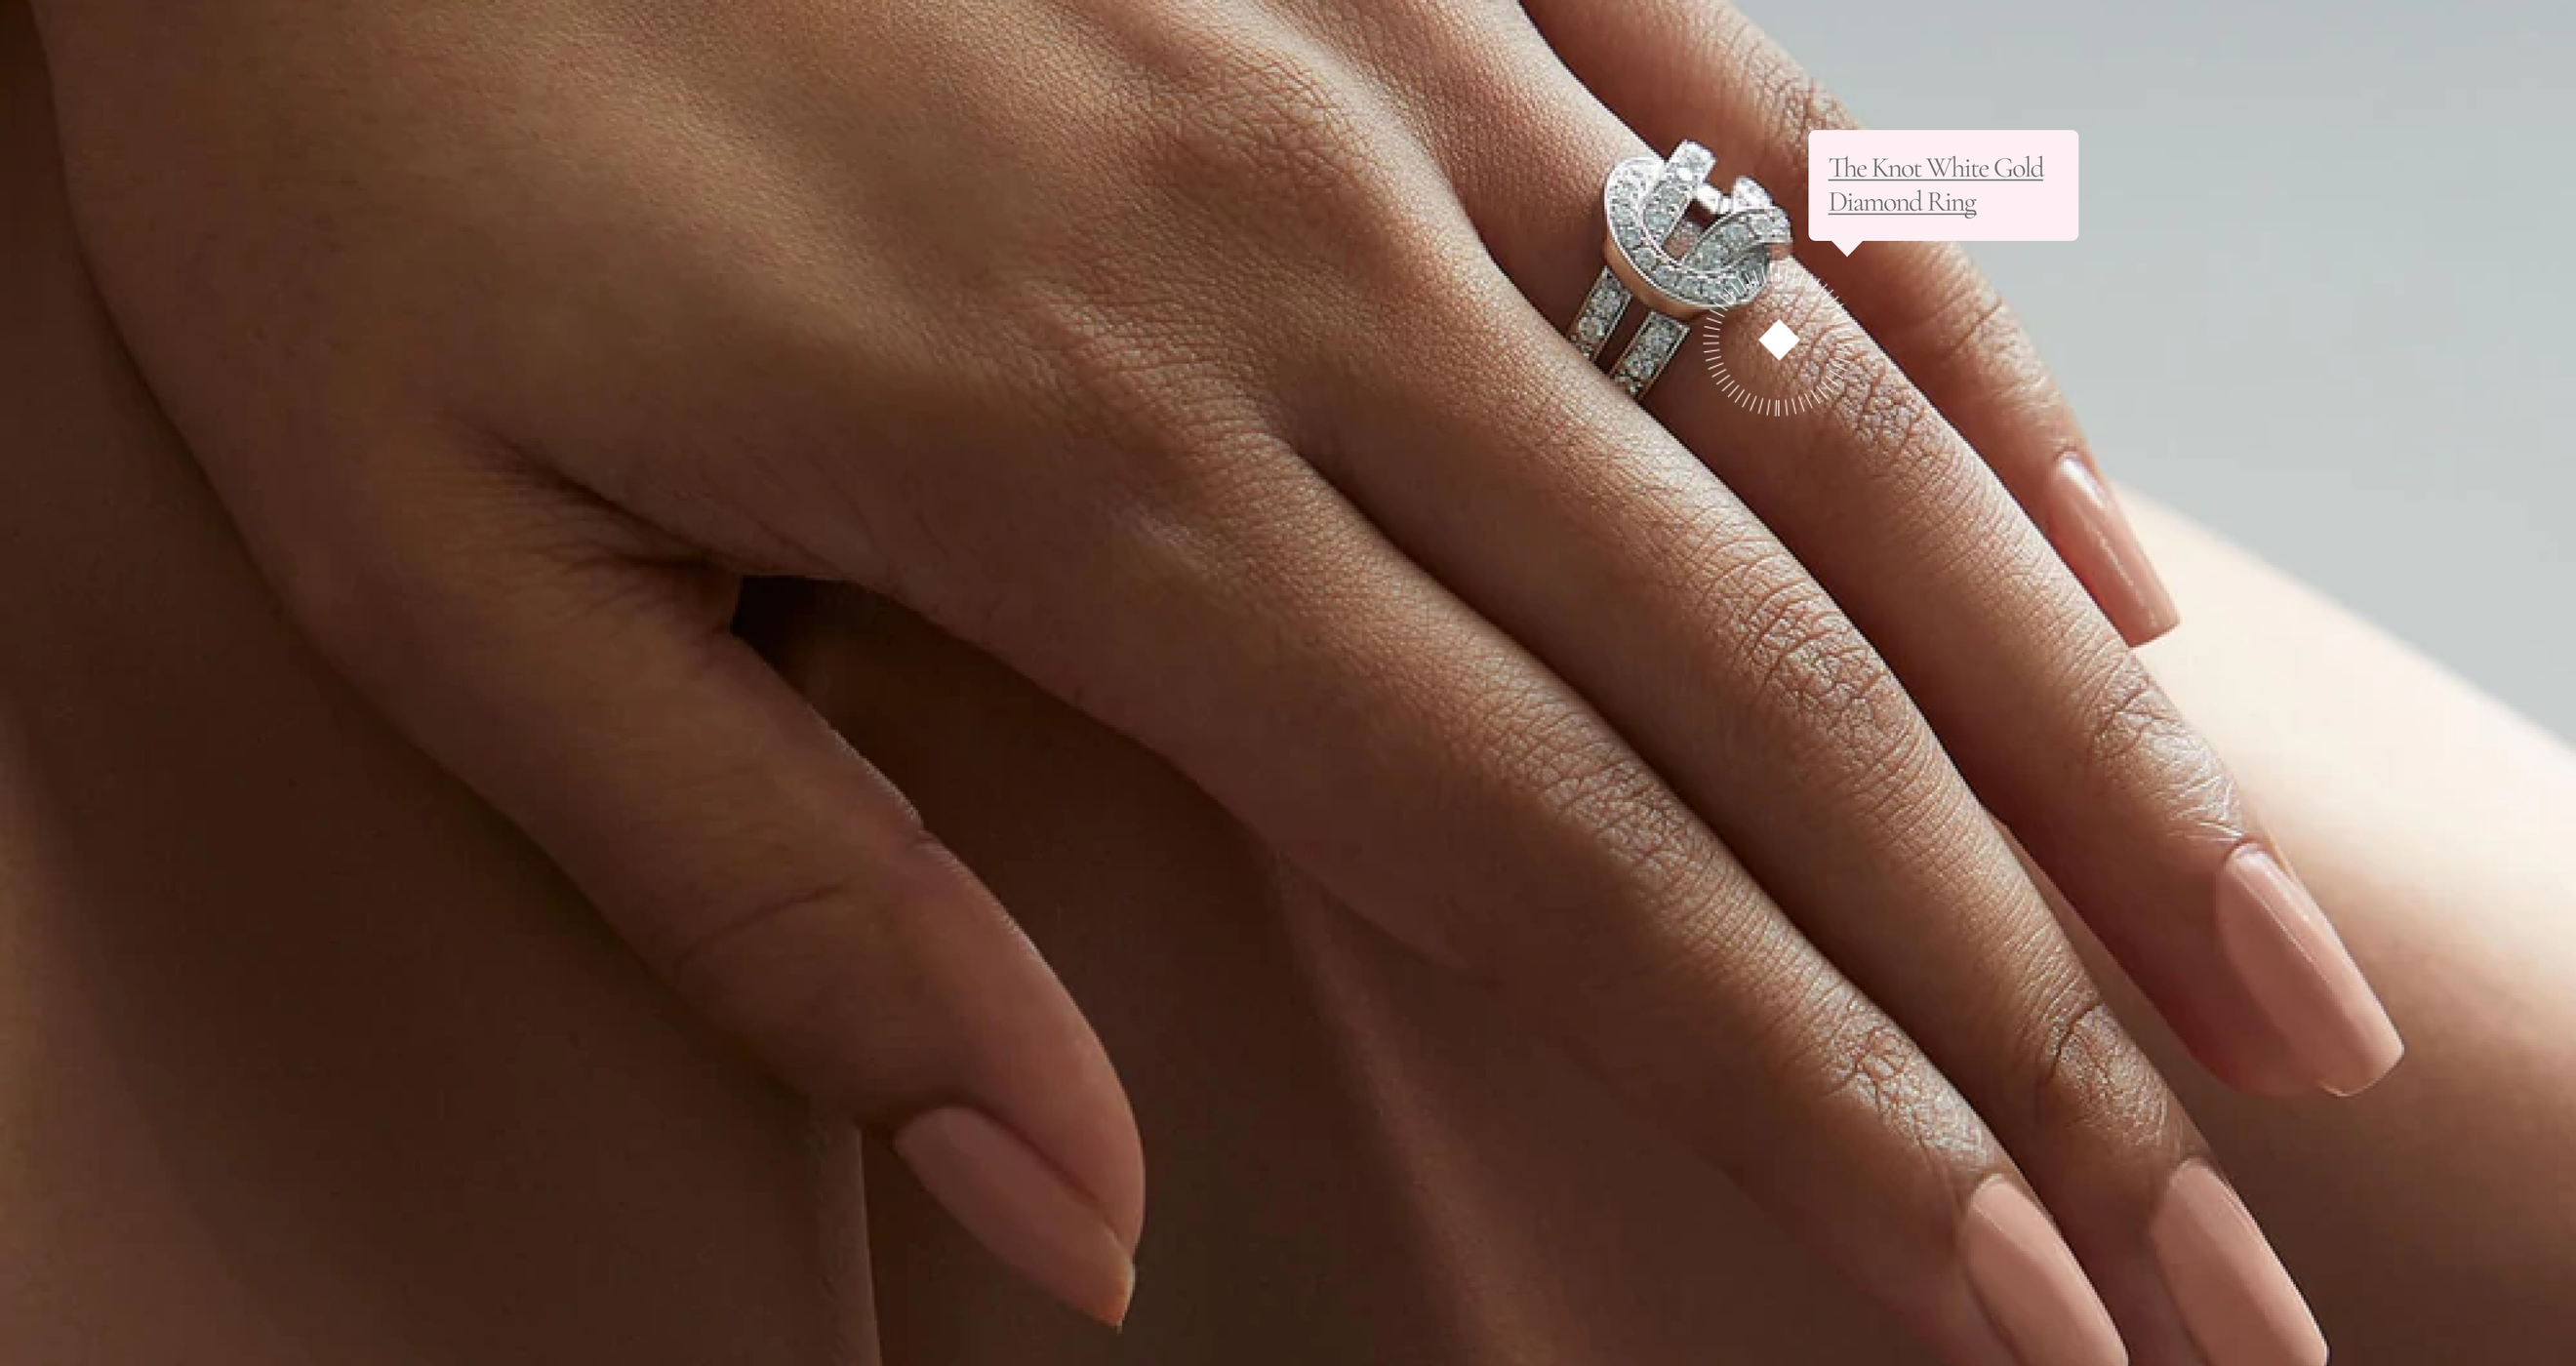 Boodles Hotspot on campaign image showing Diamond Ring detials